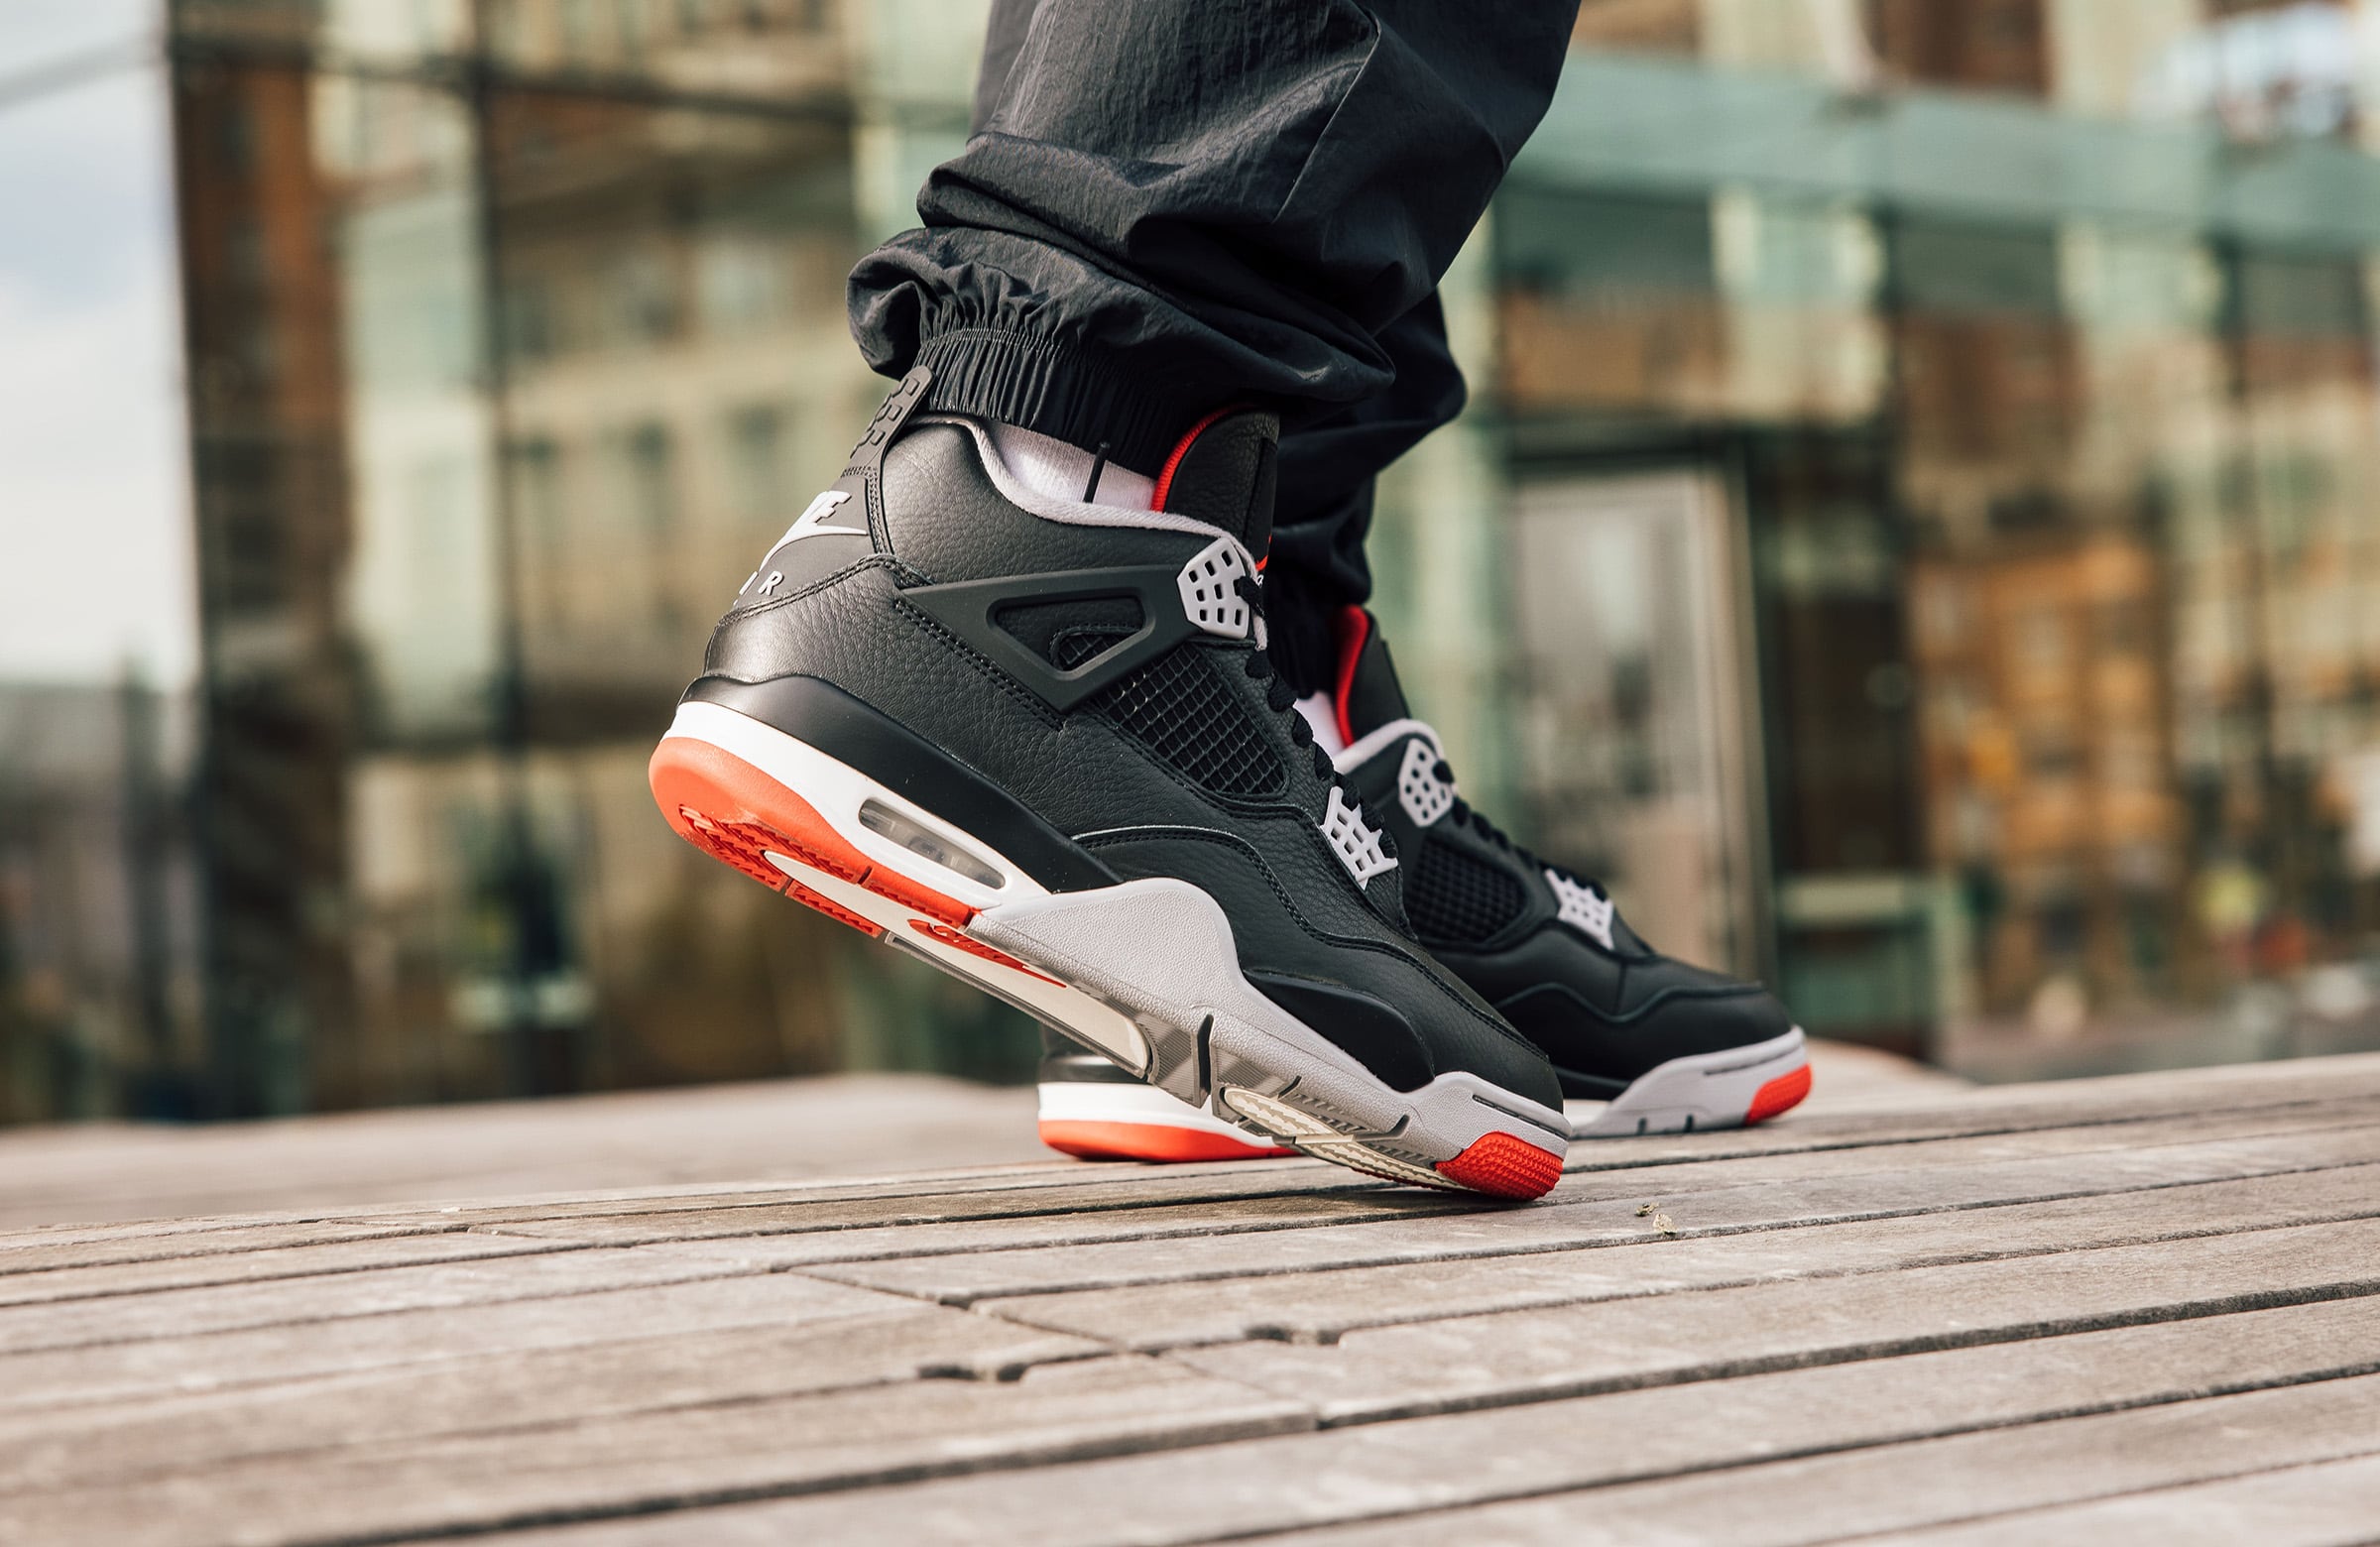 The Air Jordan 4 Retro “Bred Reimagined” is Dropping Soon – DTLR